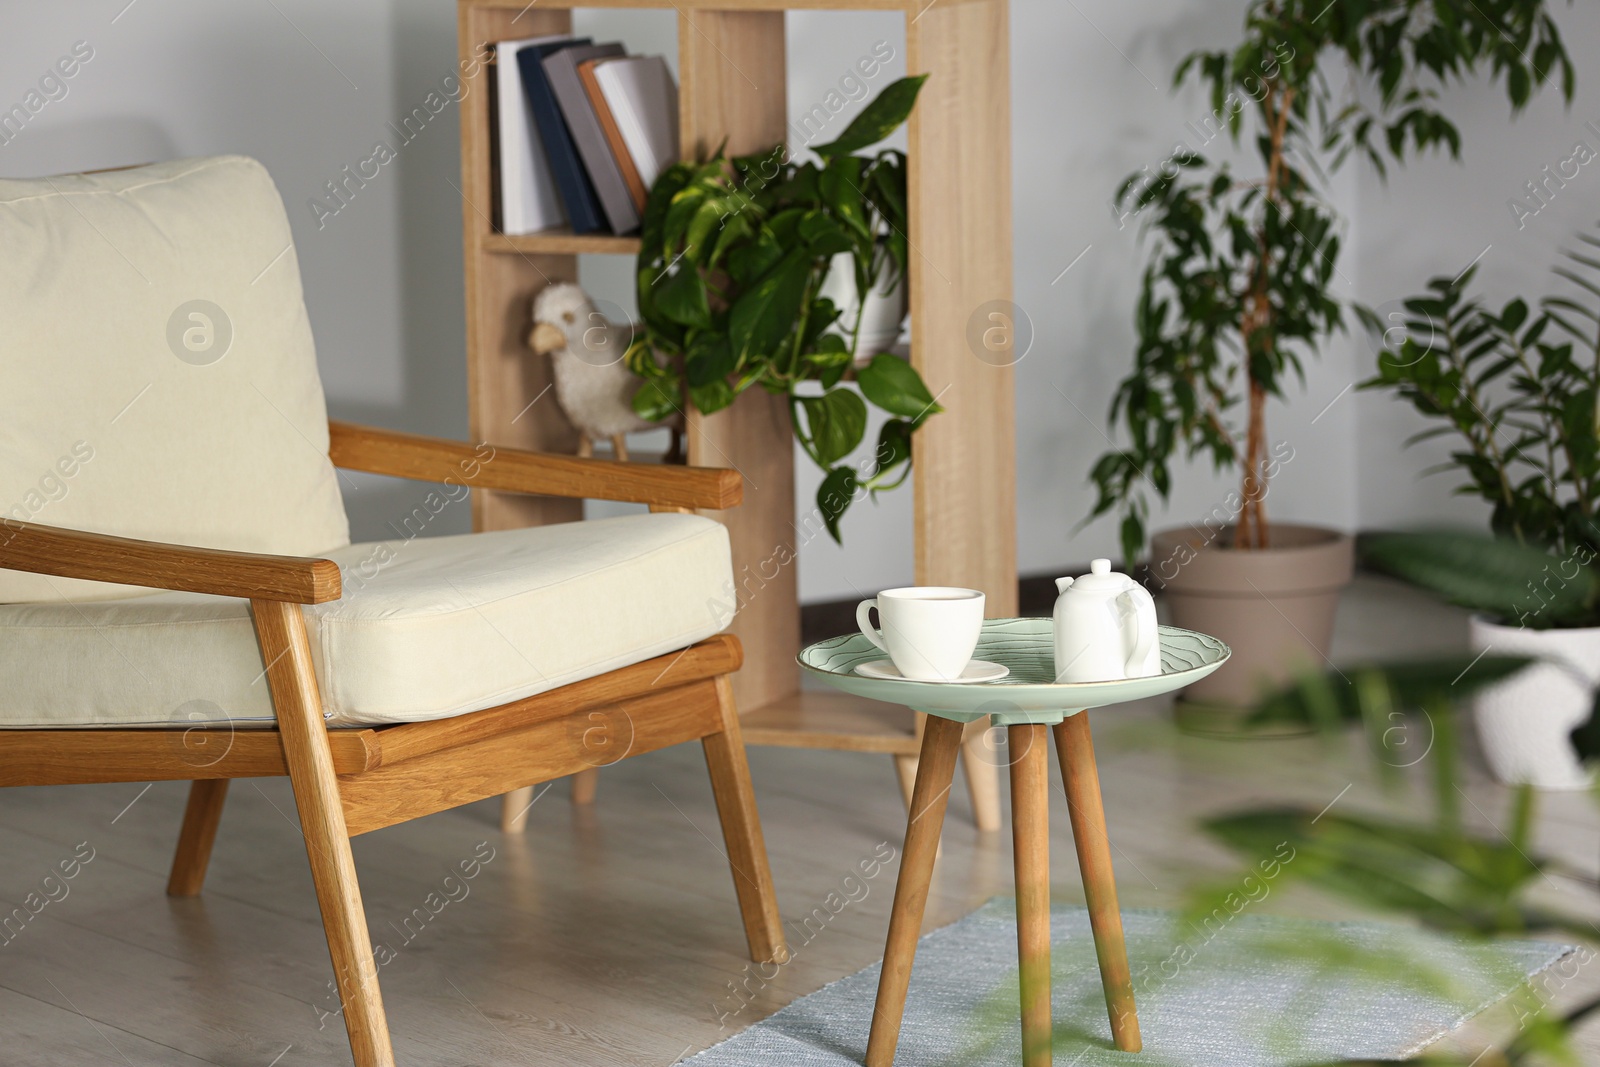 Photo of Stylish armchair, side table with cup and teapot near beautiful houseplants. Interior design